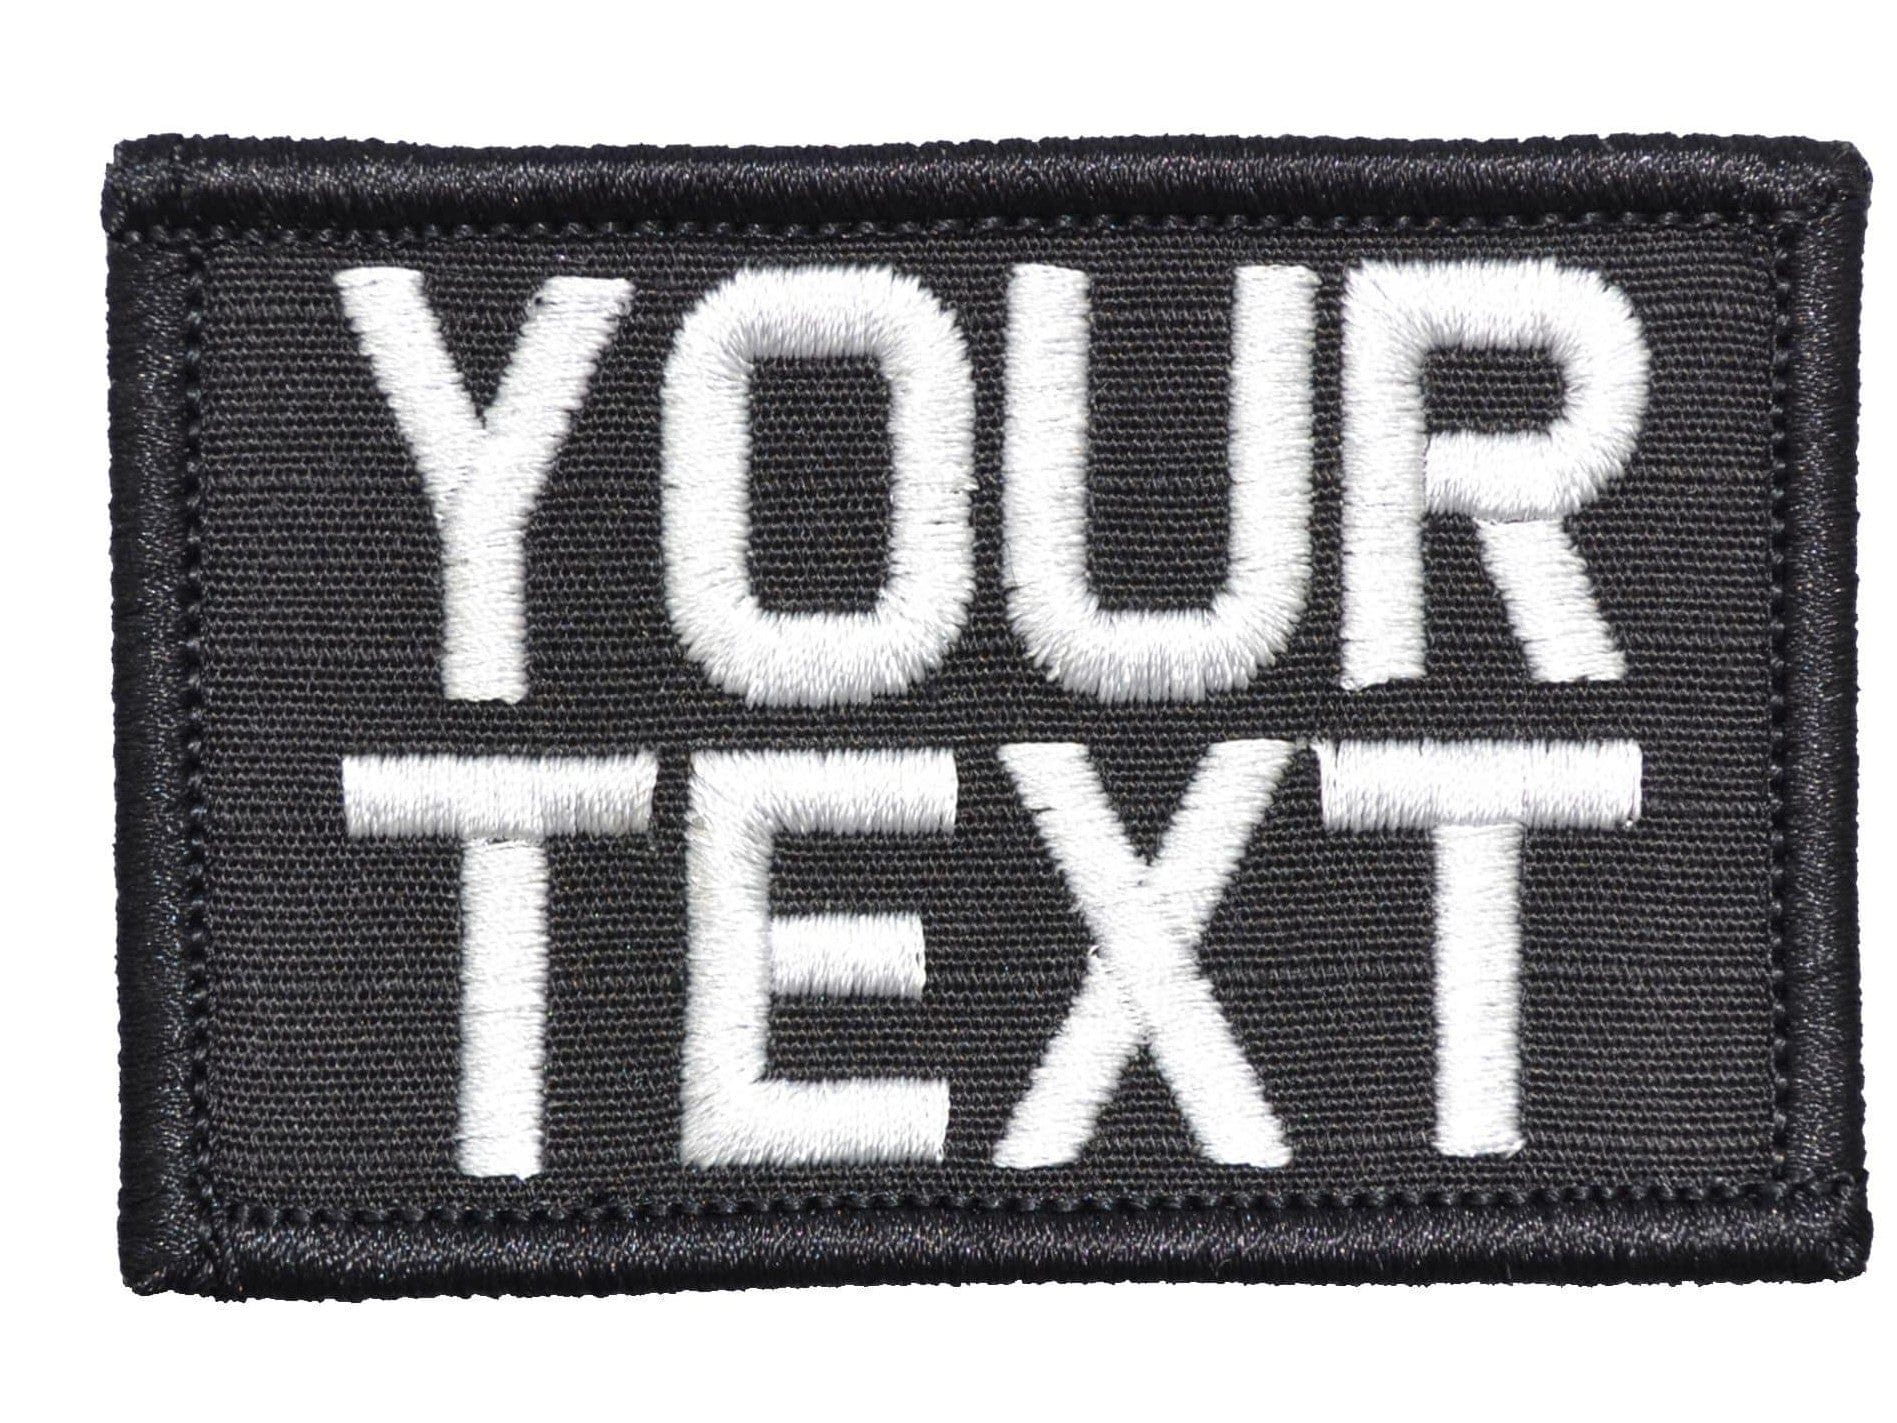 CDzyzh Velcro Patches, 24pcs Tactical Morale Embroidery Patches Embroidered  Military Funny Words Hook and Loop Patches for